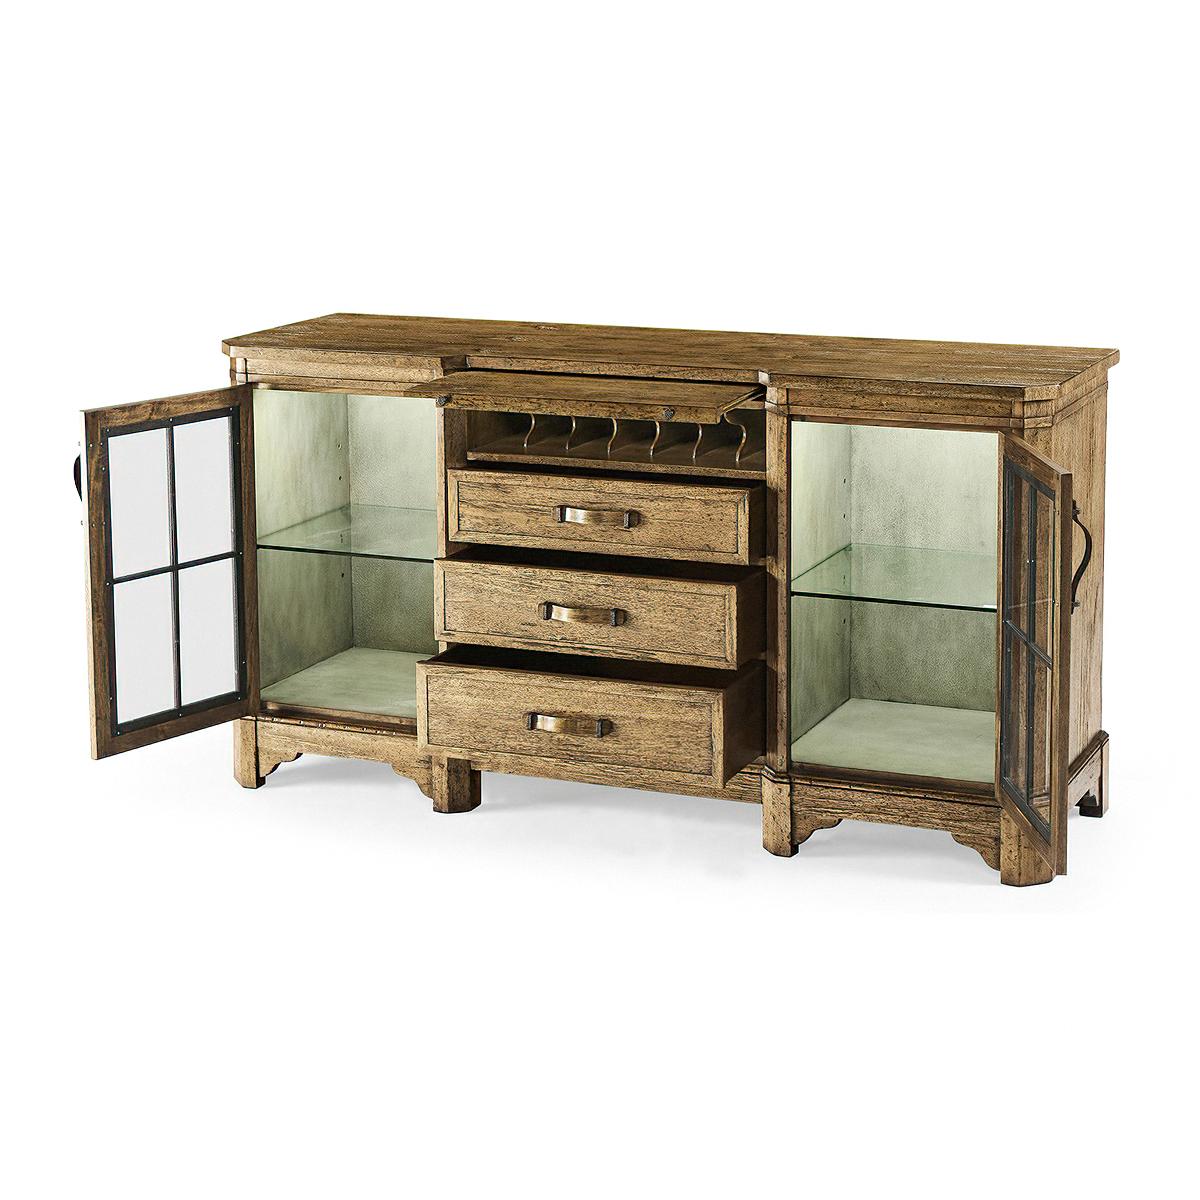 Rustic English Country Buffet Sideboard For Sale